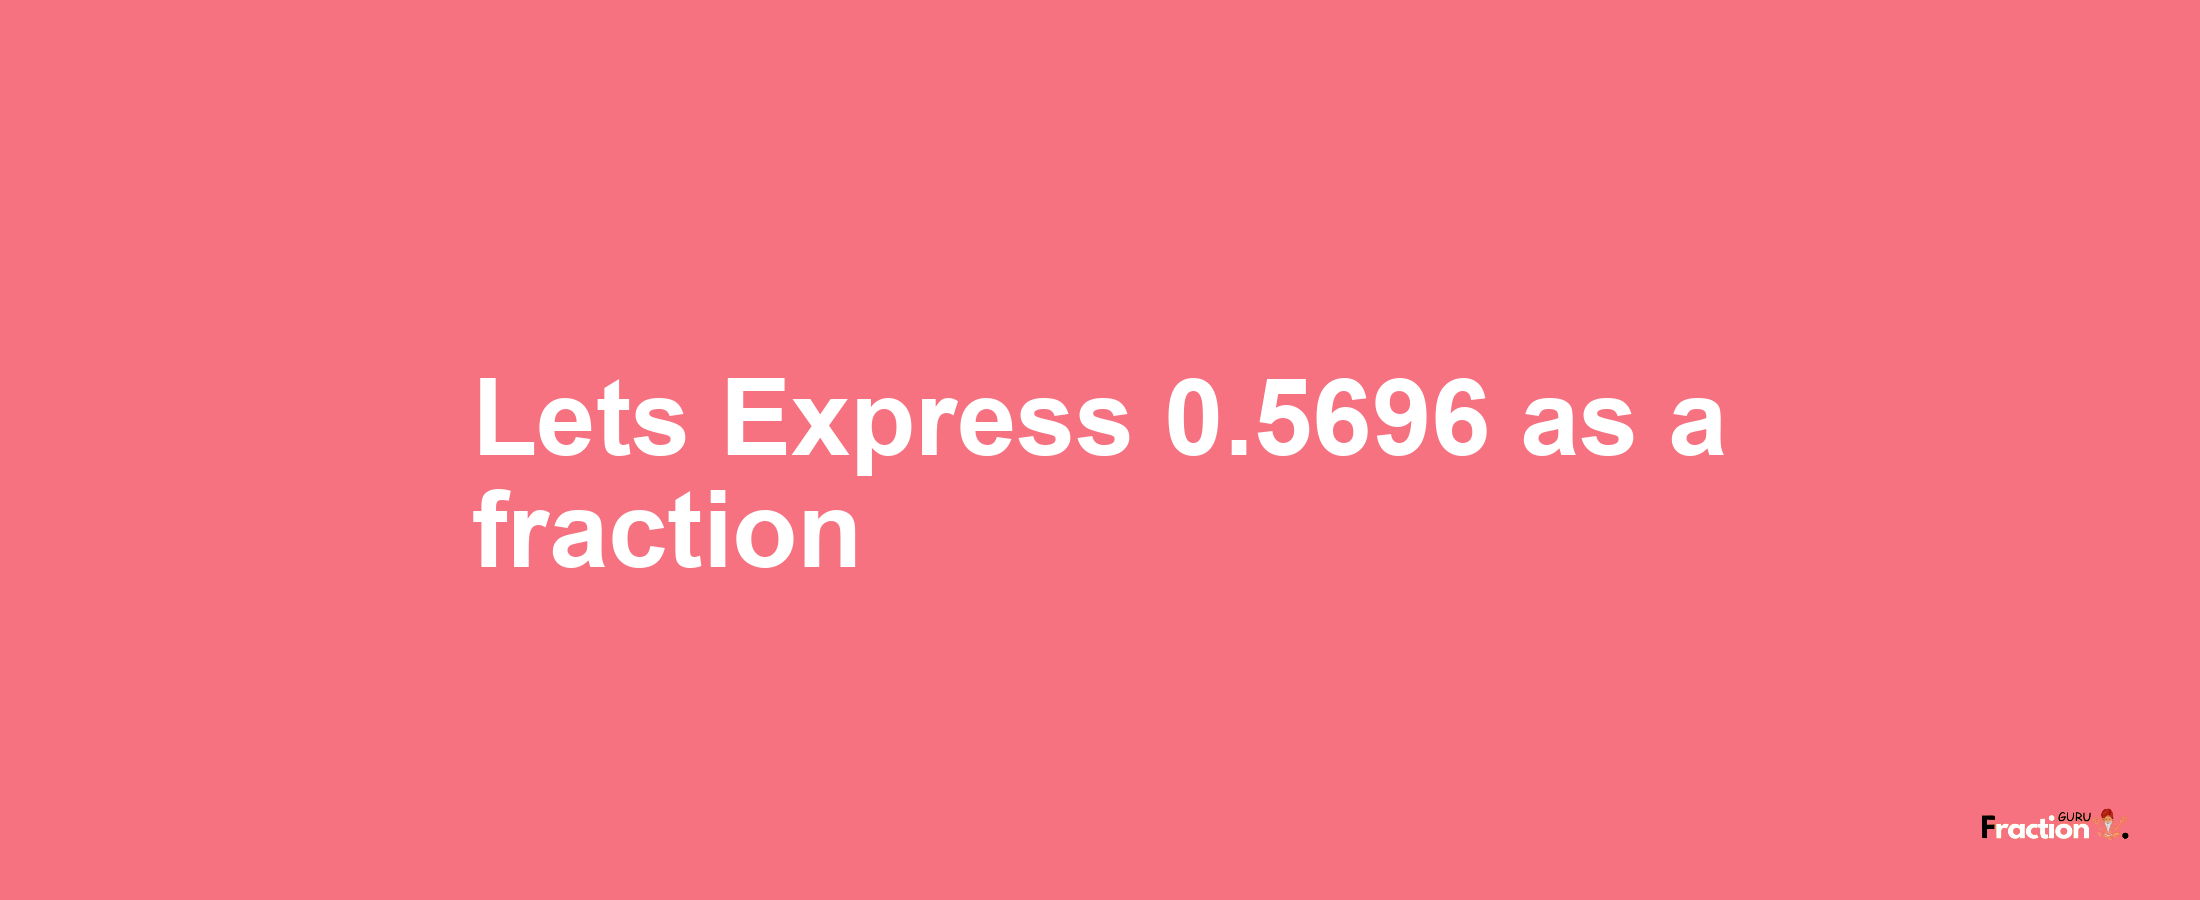 Lets Express 0.5696 as afraction